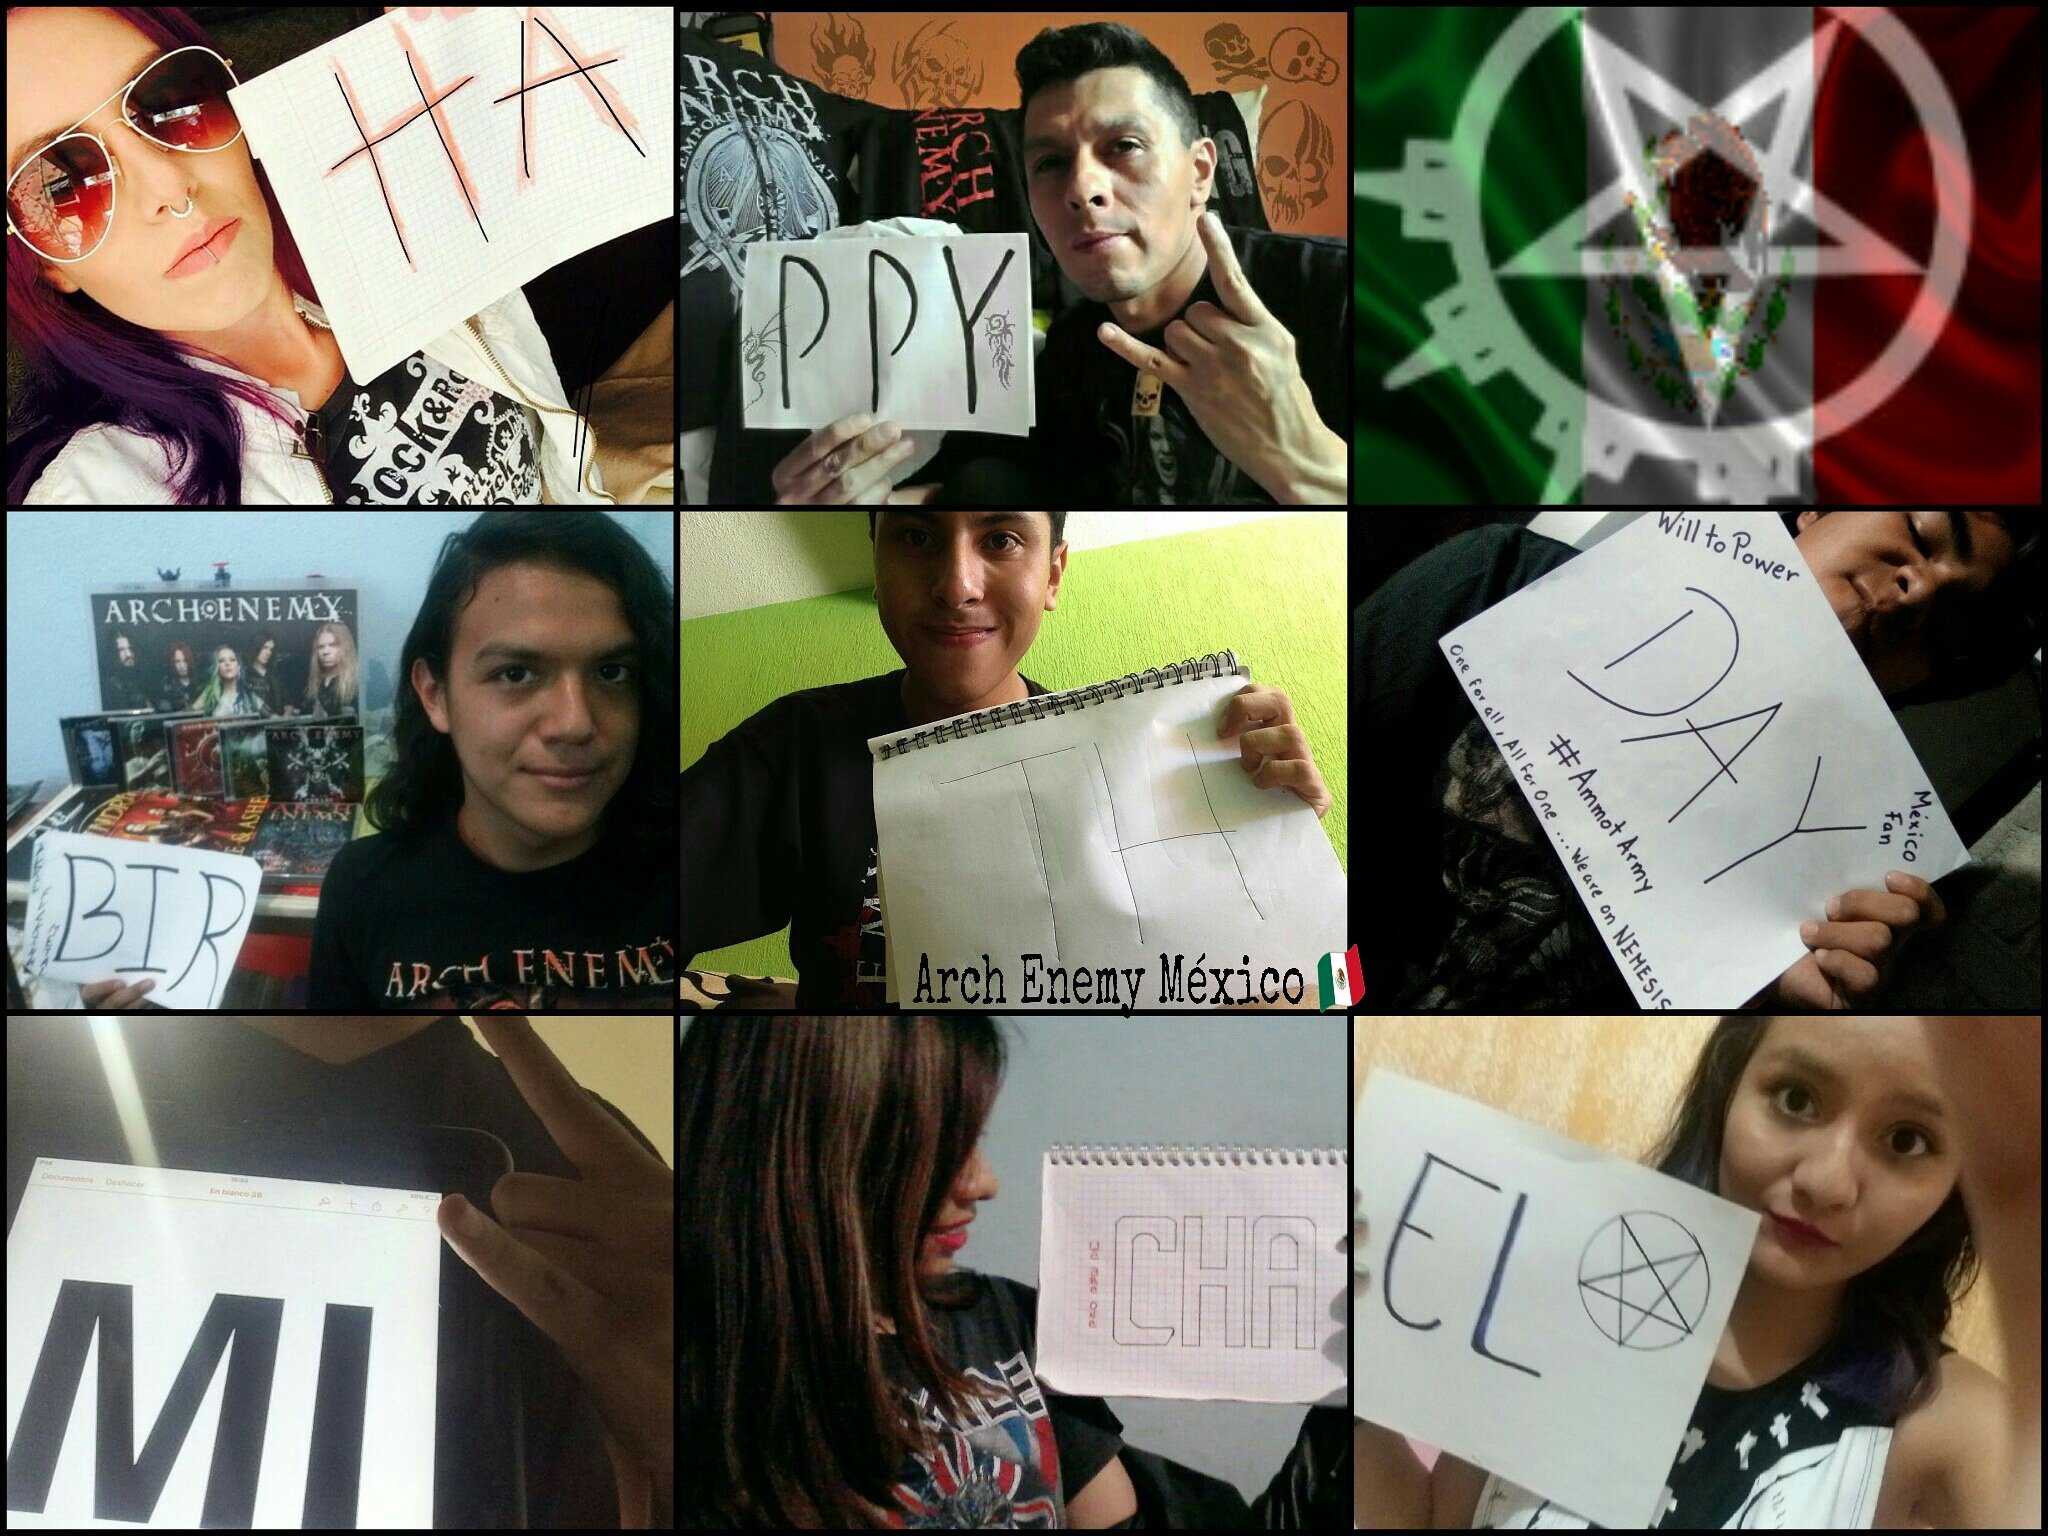 I hope you like what some fans of Mexico did for you
Happy Birthday   